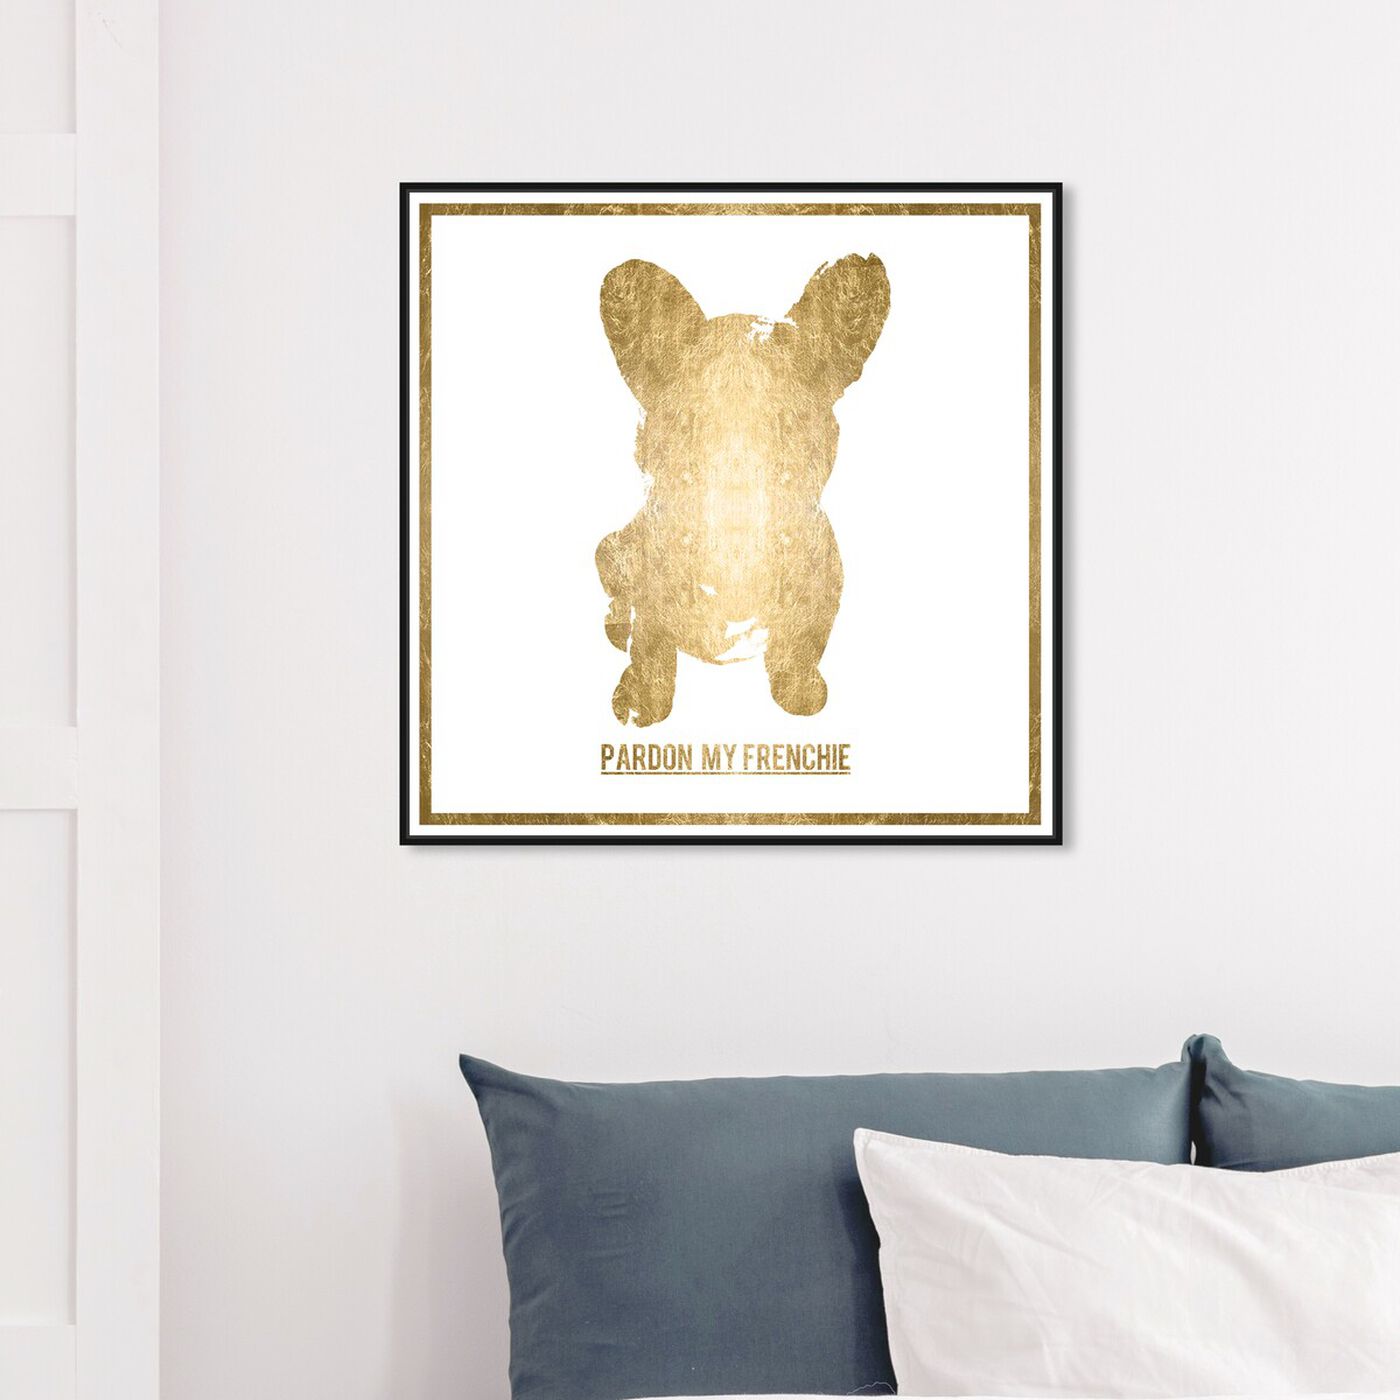 Hanging view of Pardon my Frenchie Gold Foil featuring animals and dogs and puppies art.